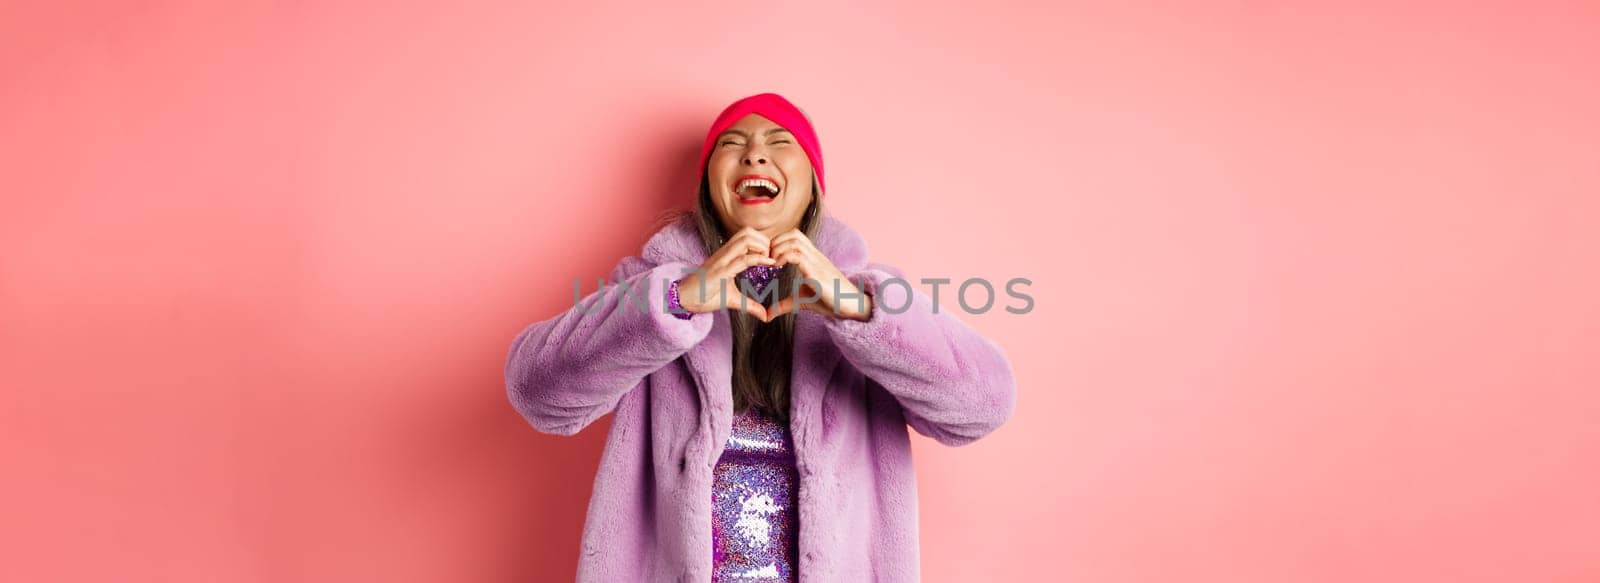 Valentines day and shopping concept. Happy asian woman in stylish outfit showing heart sign and laughing carefree, standing in faux fur against pink background.